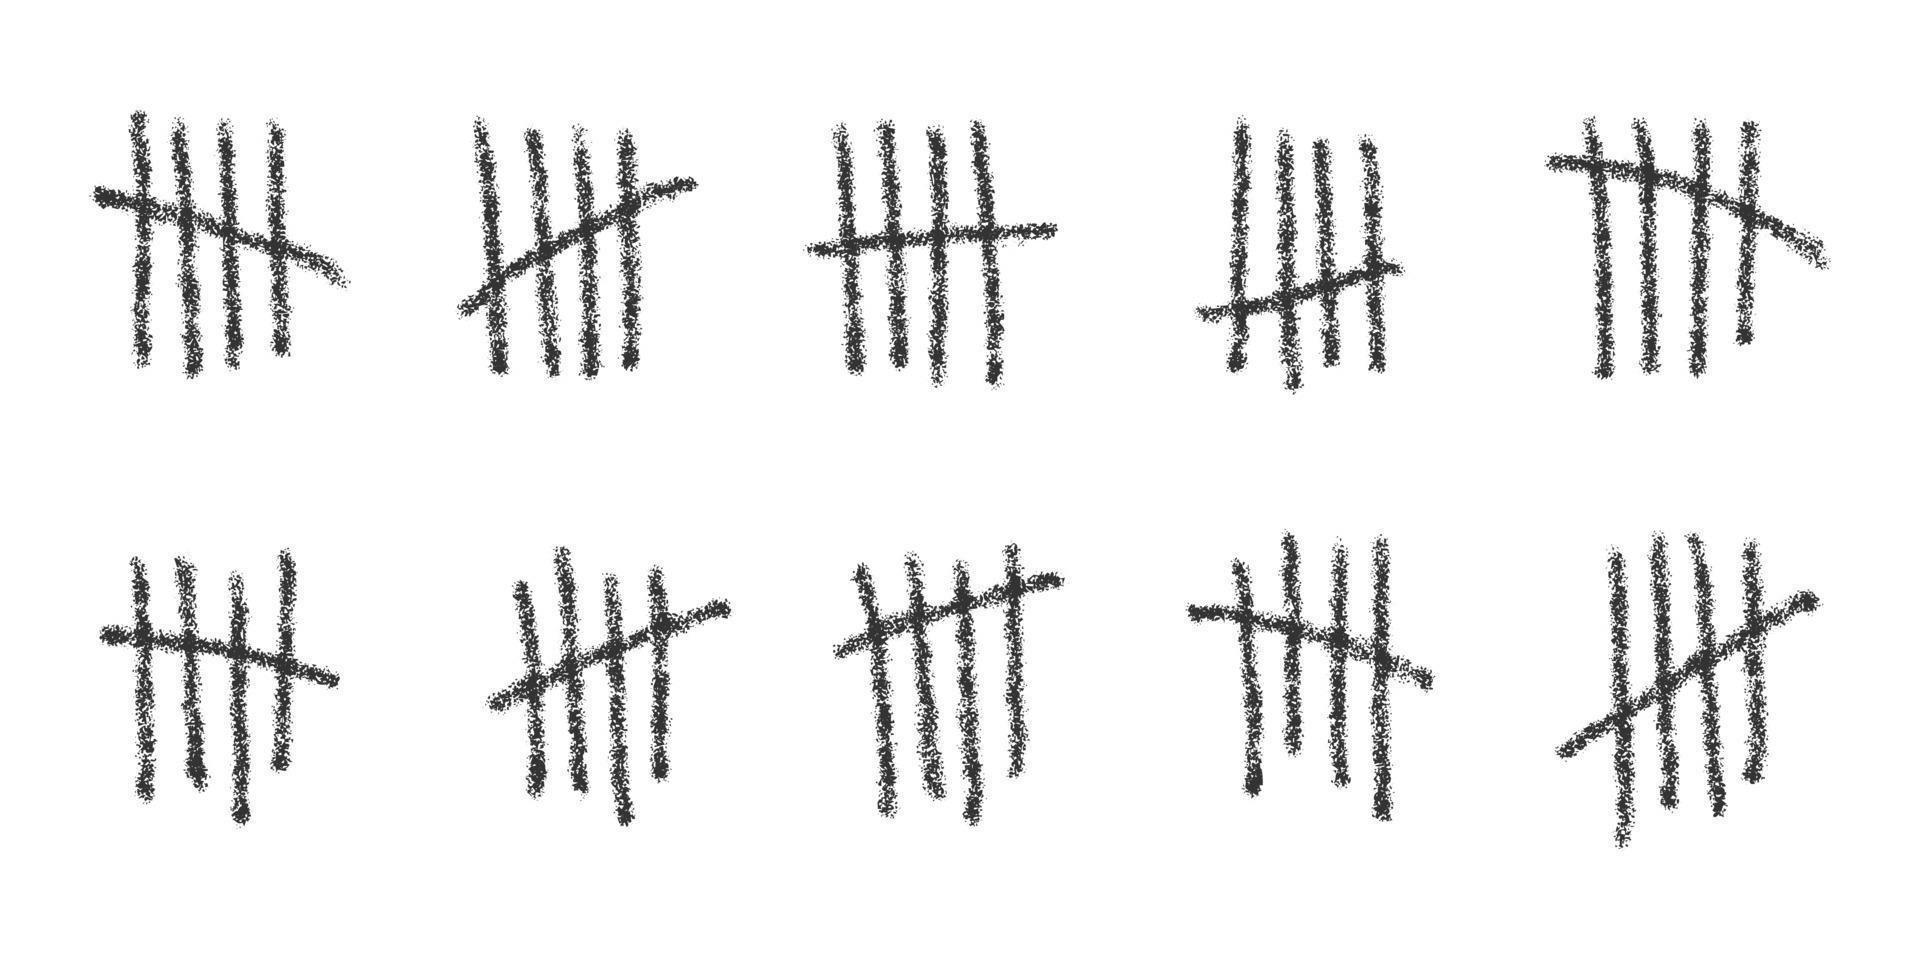 Charcoal tally marks. Hand drawn sticks sorted by four and crossed out by slash line. Day counting symbols on prison wall. Unary numeral system signs vector